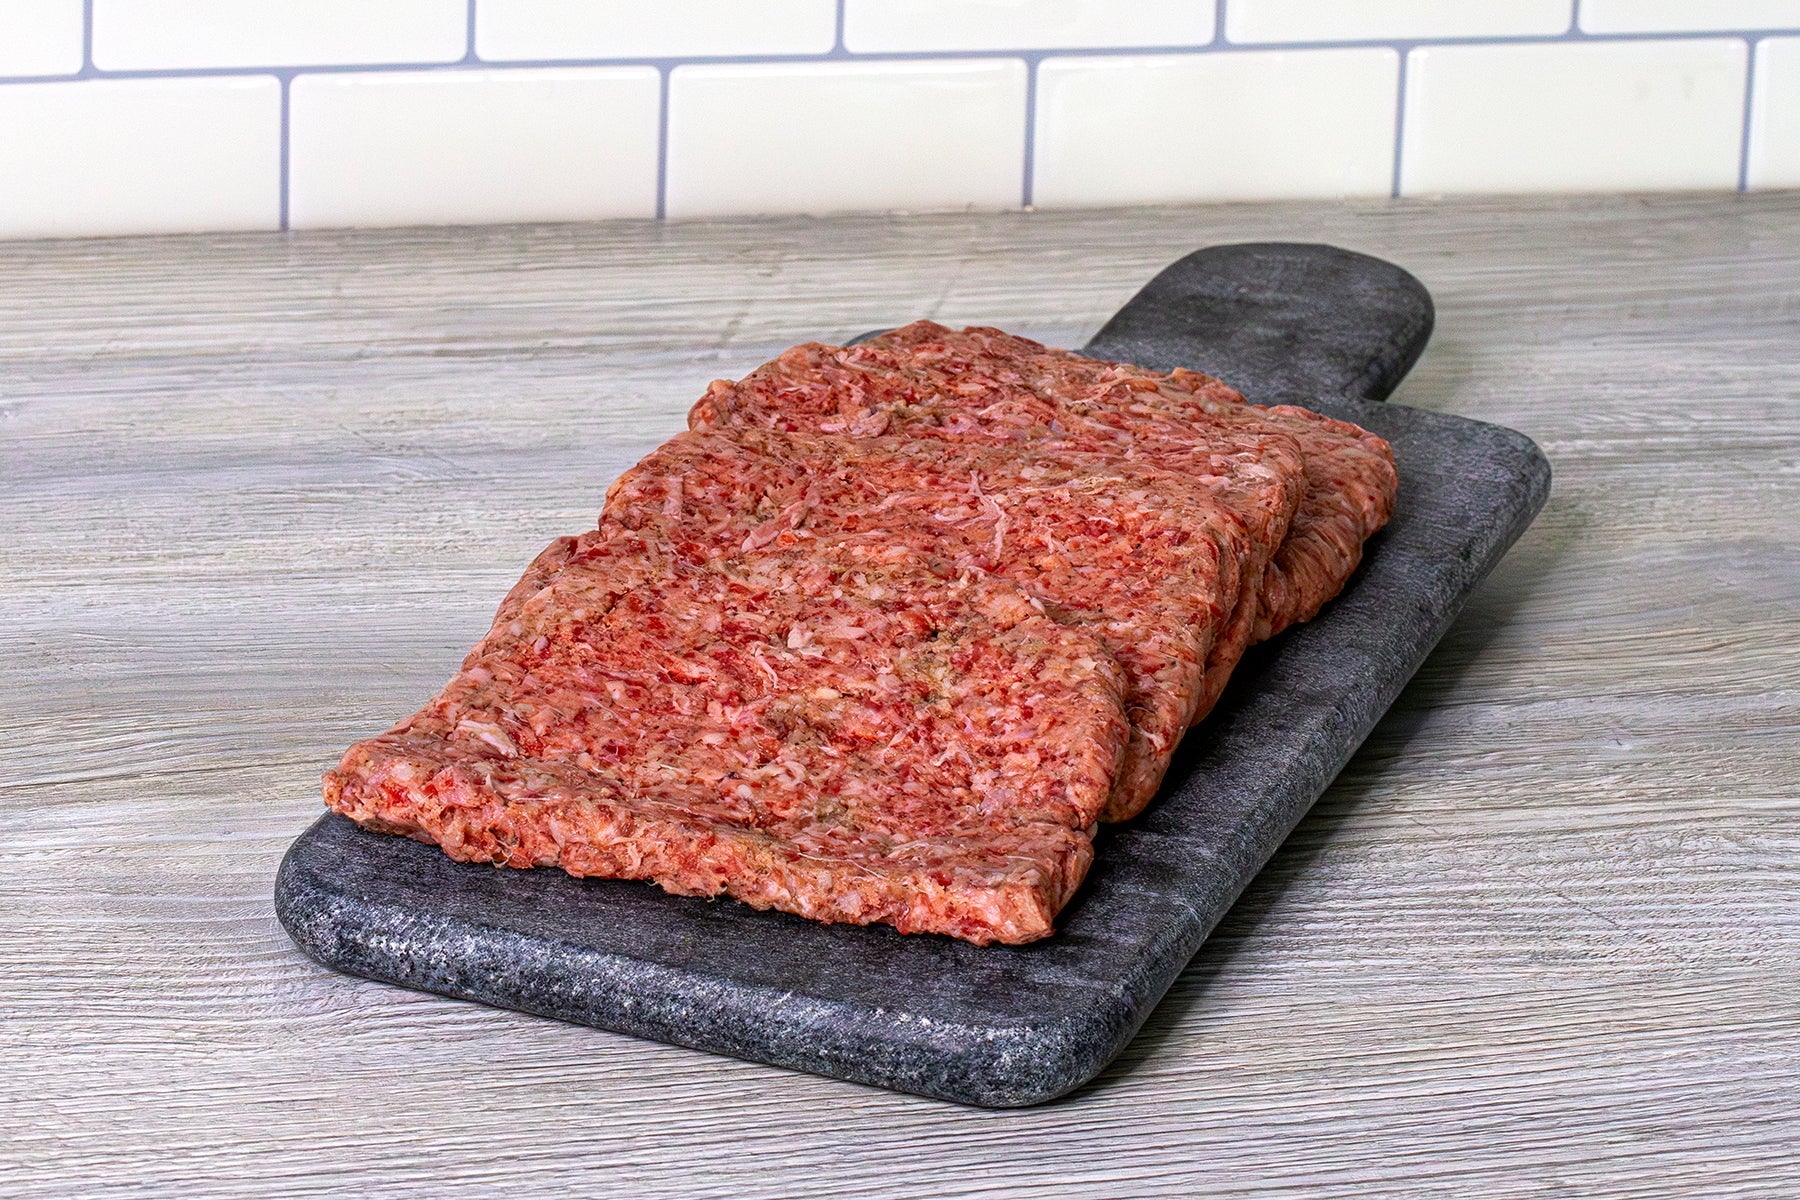 Image of Ackroyd's Sliced Beef Sausage (Approx 1 Pound)